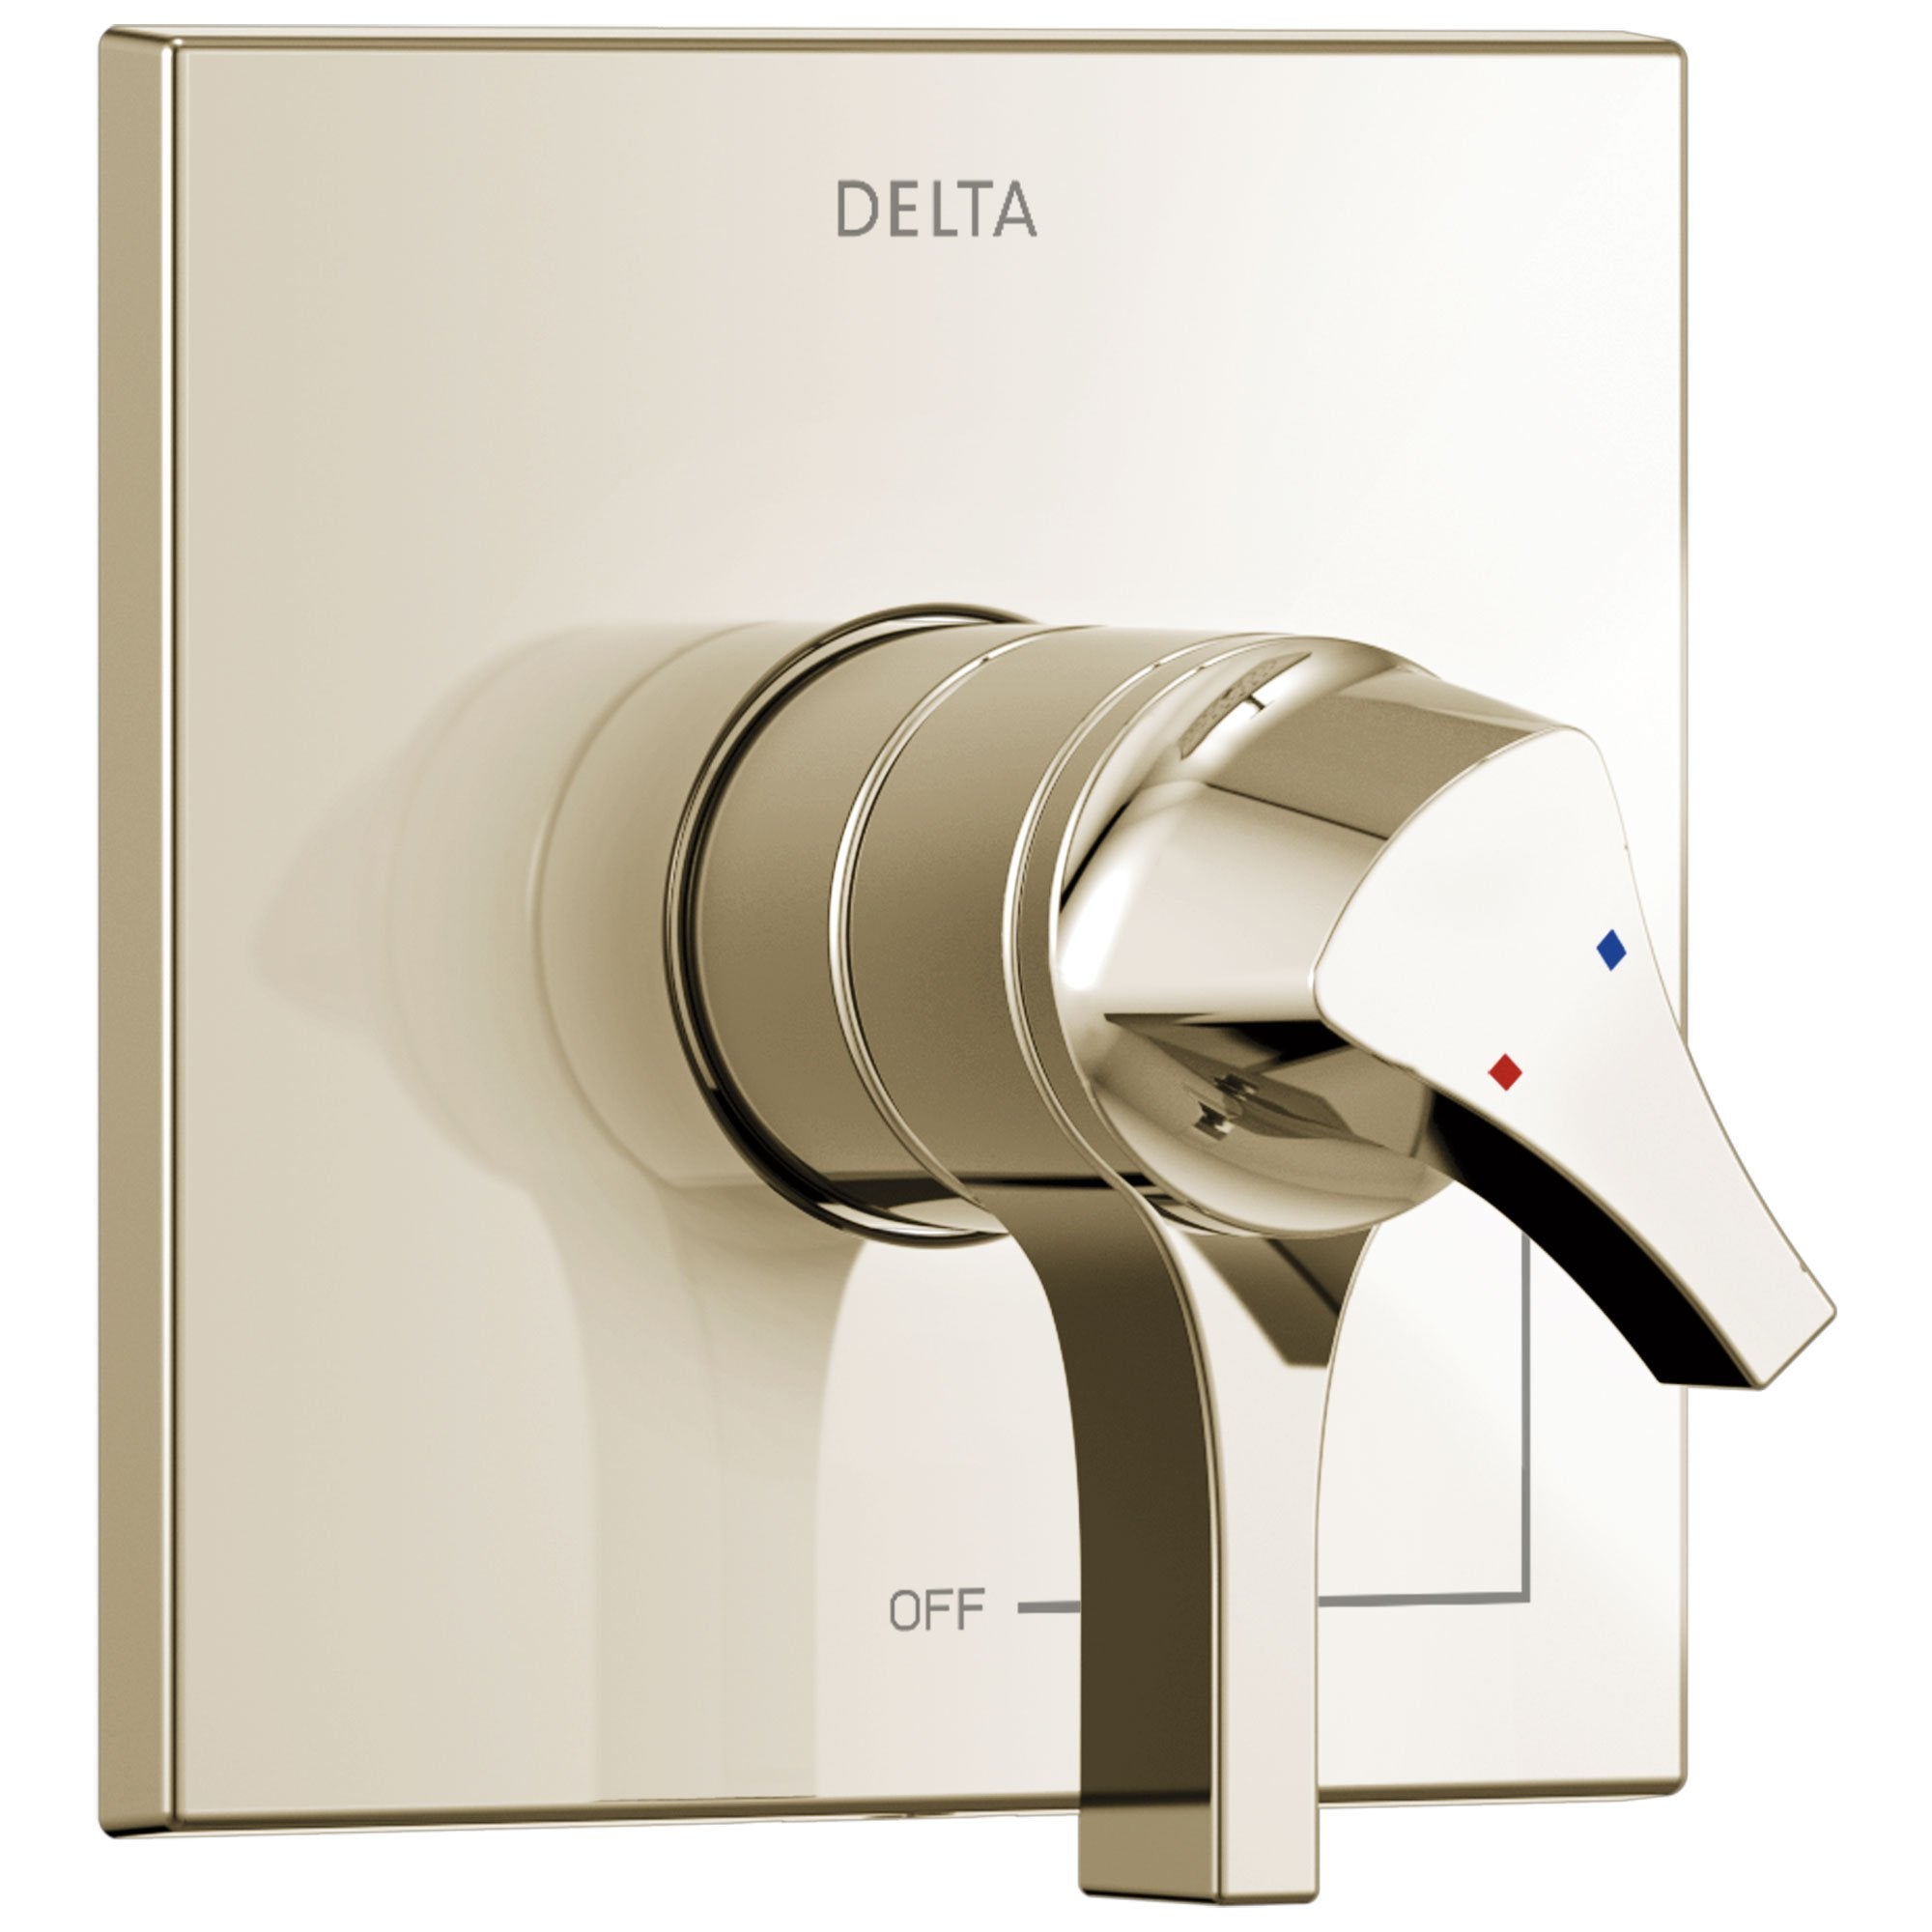 Delta Zura Collection Polished Nickel Monitor 17 Dual Temperature and Water Pressure Shower Faucet Control Includes Trim Kit and Valve without Stops D1974V